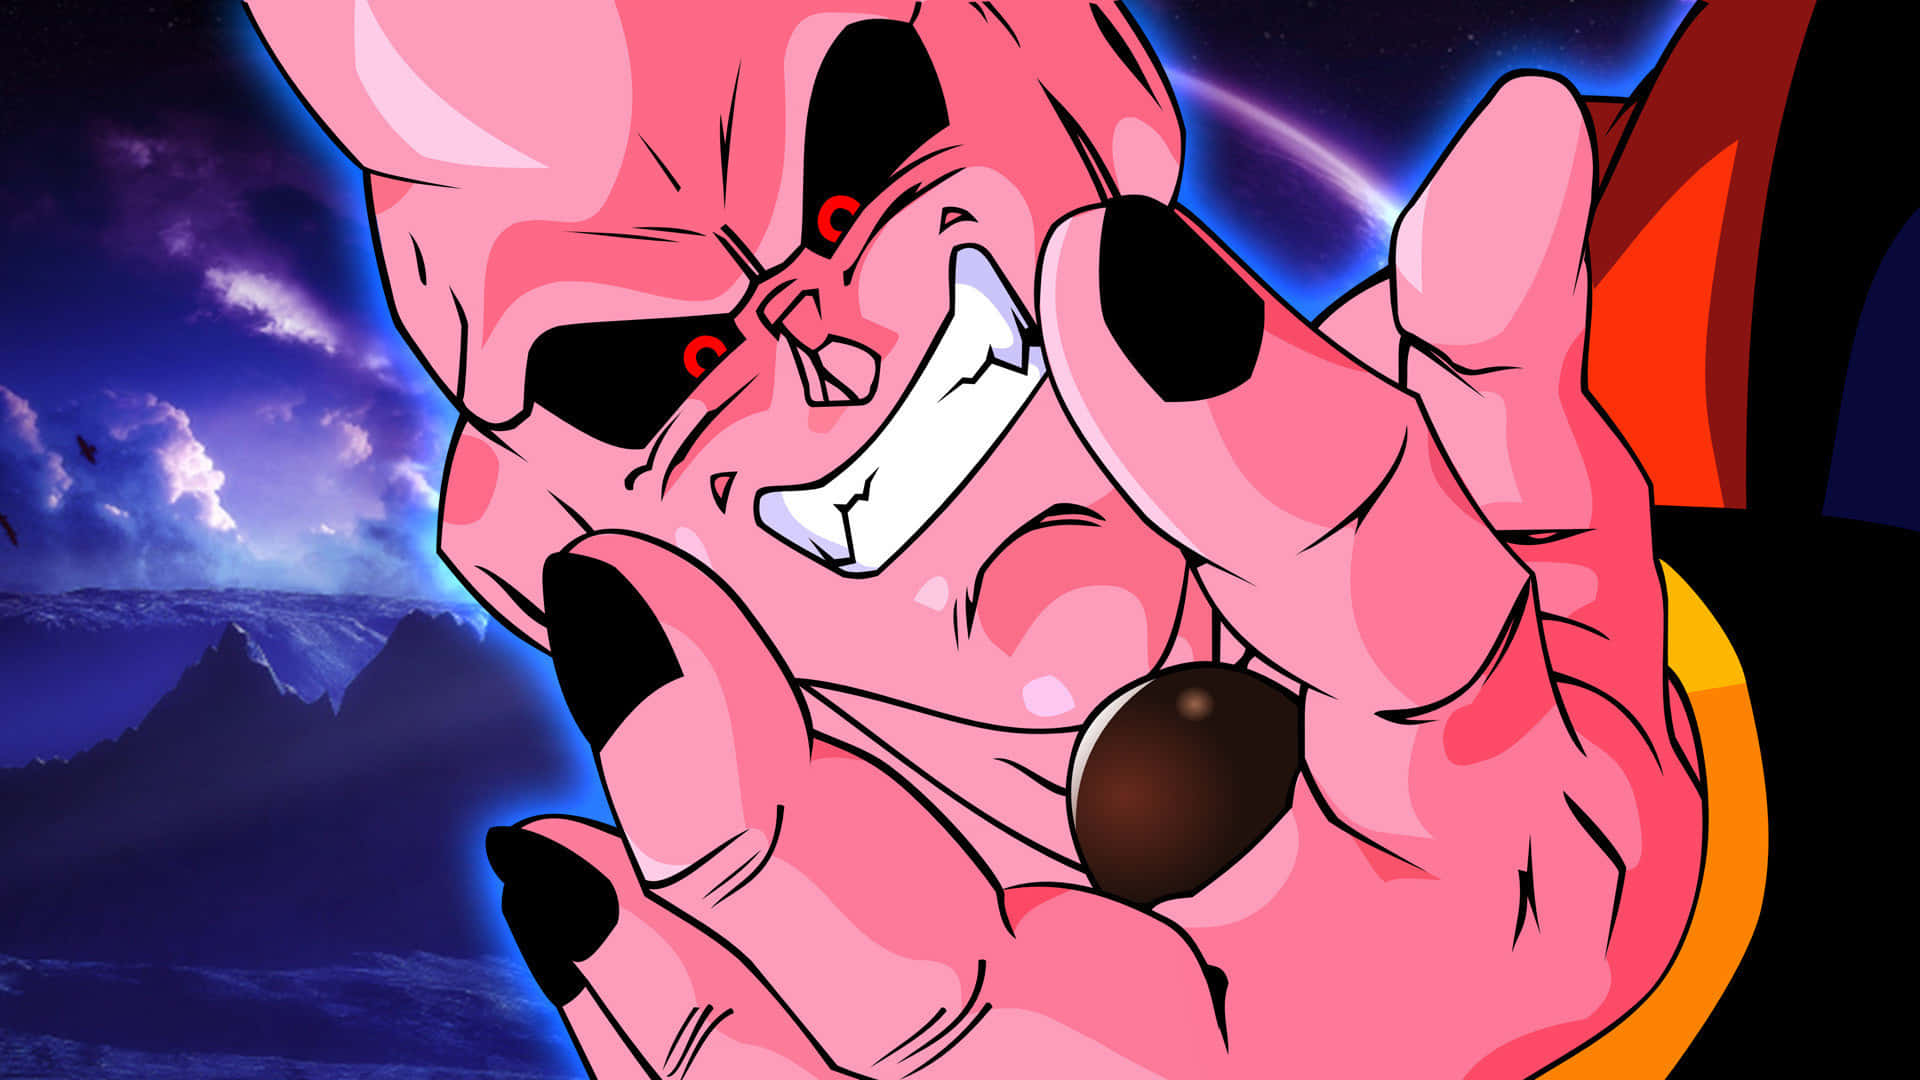 Take a journey to a new realm with Buu. Wallpaper